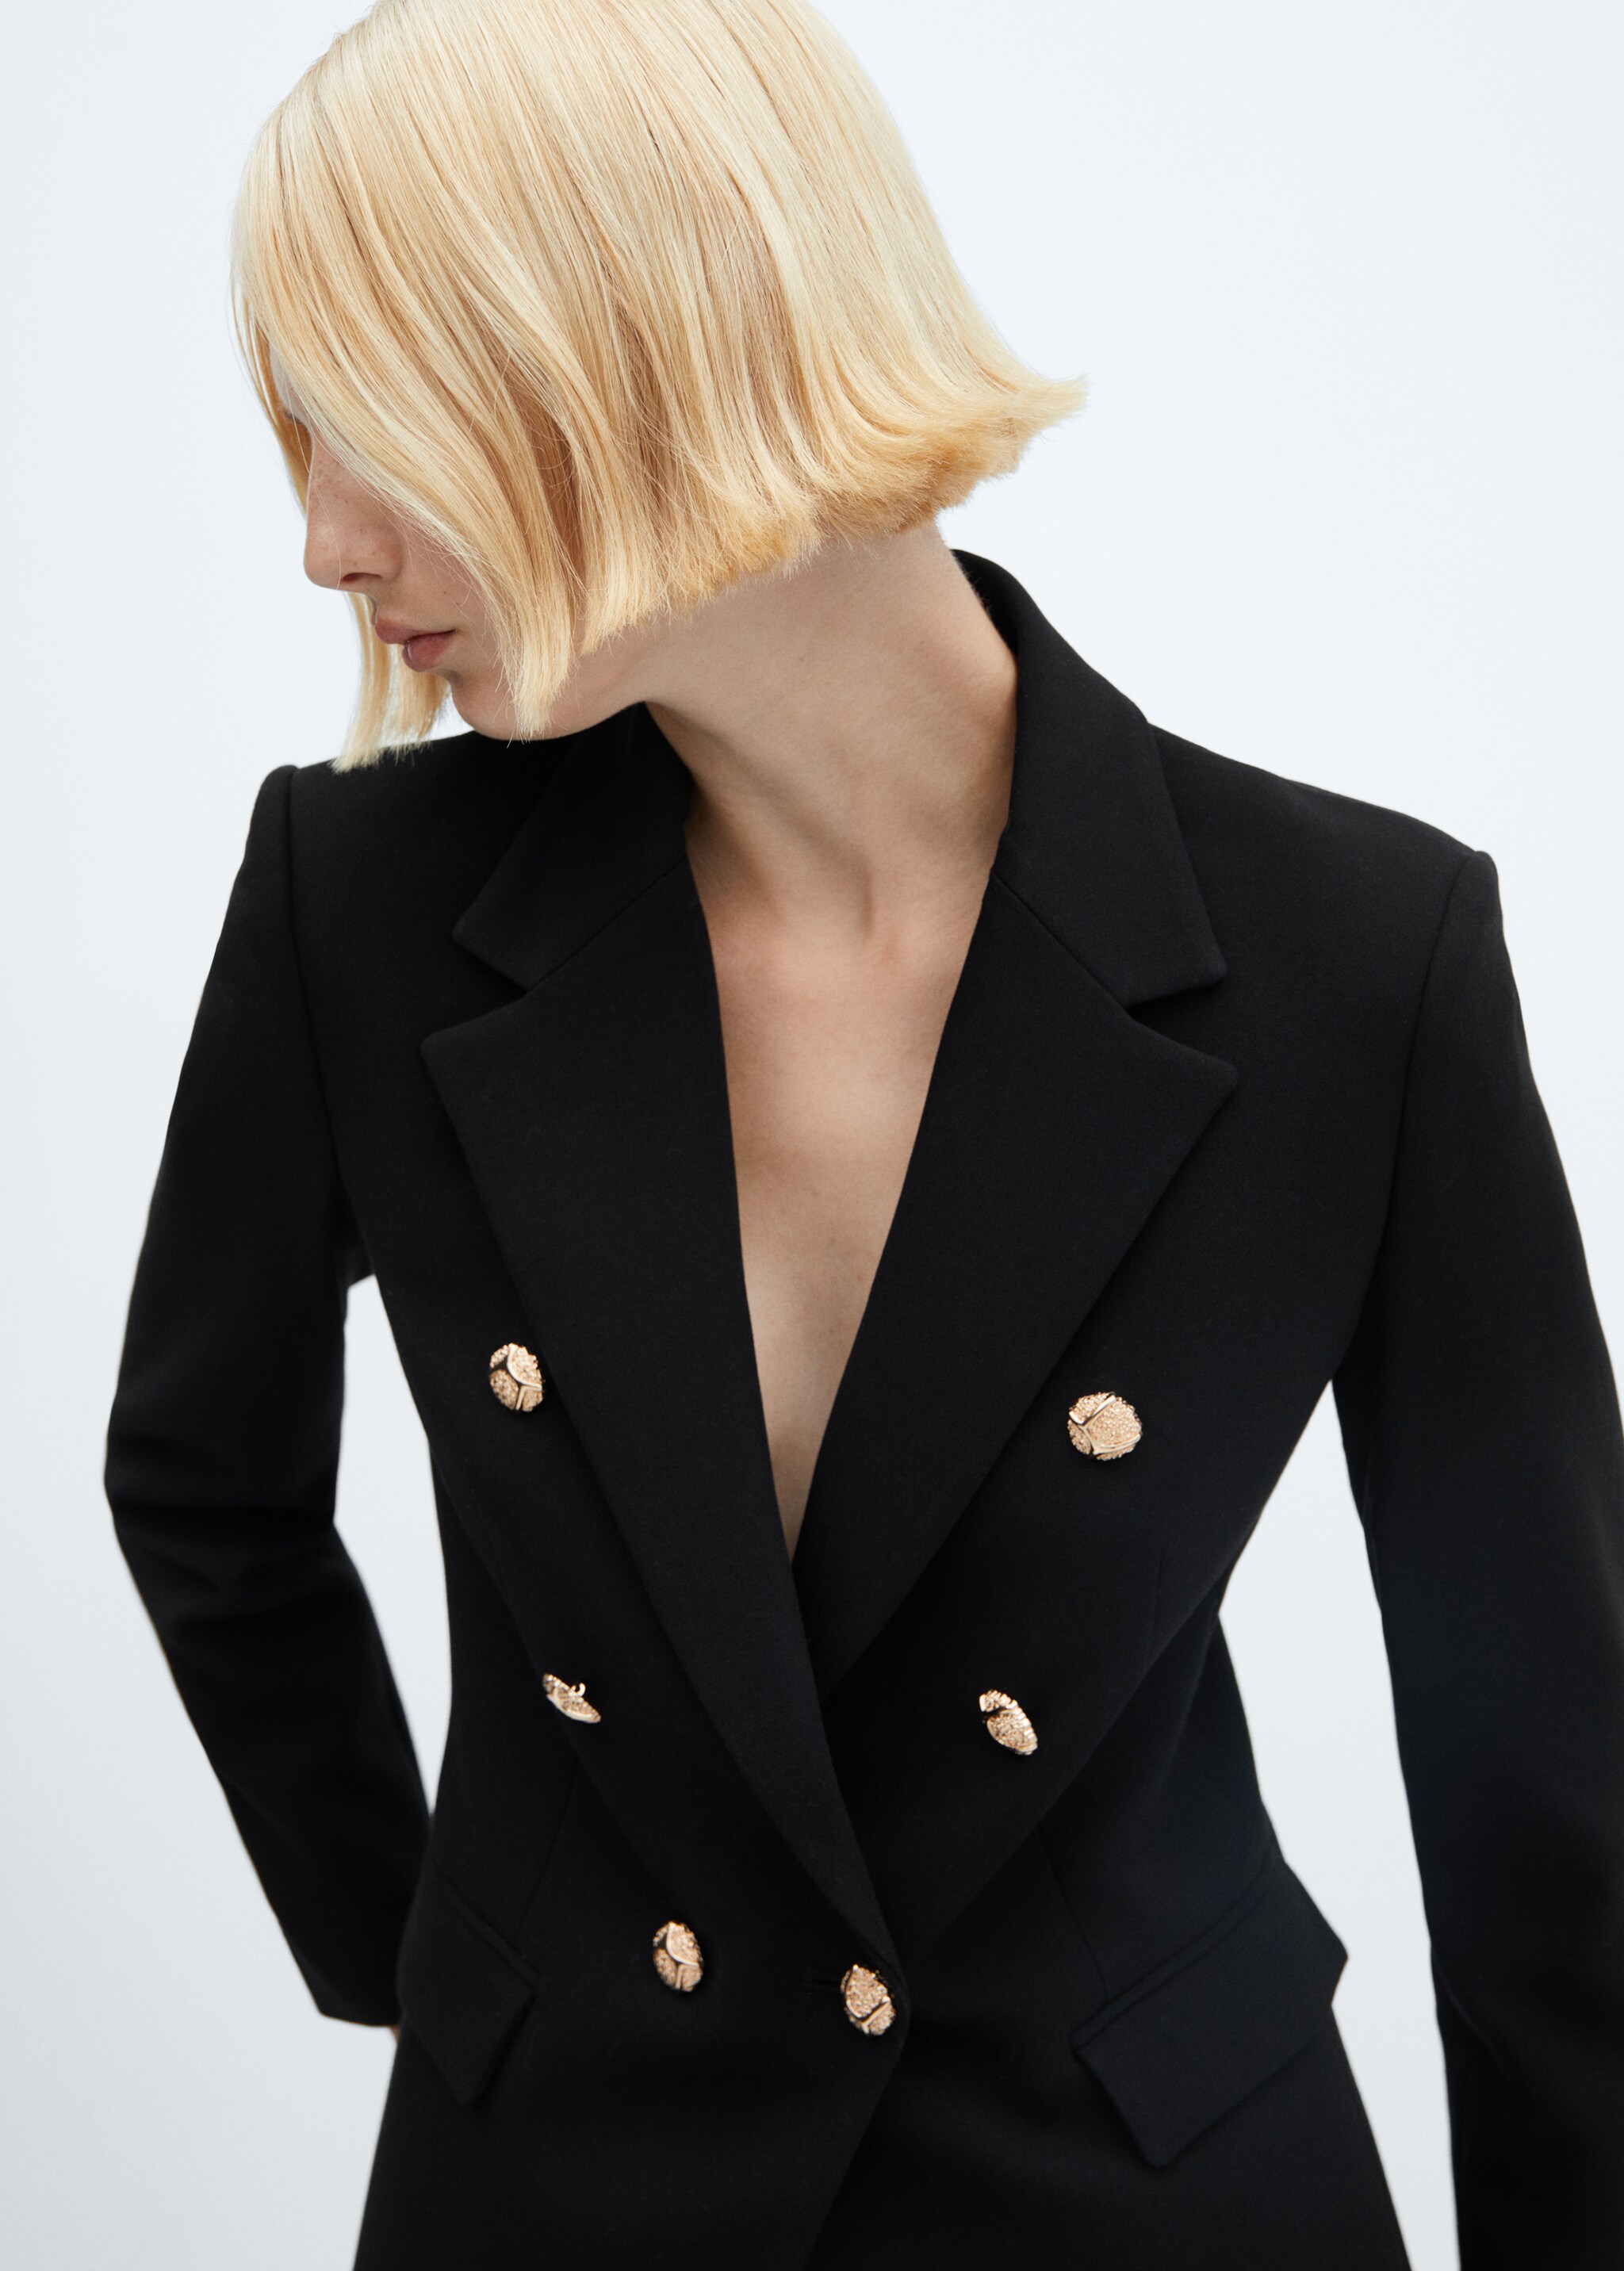 Double-breasted blazer - Details of the article 1